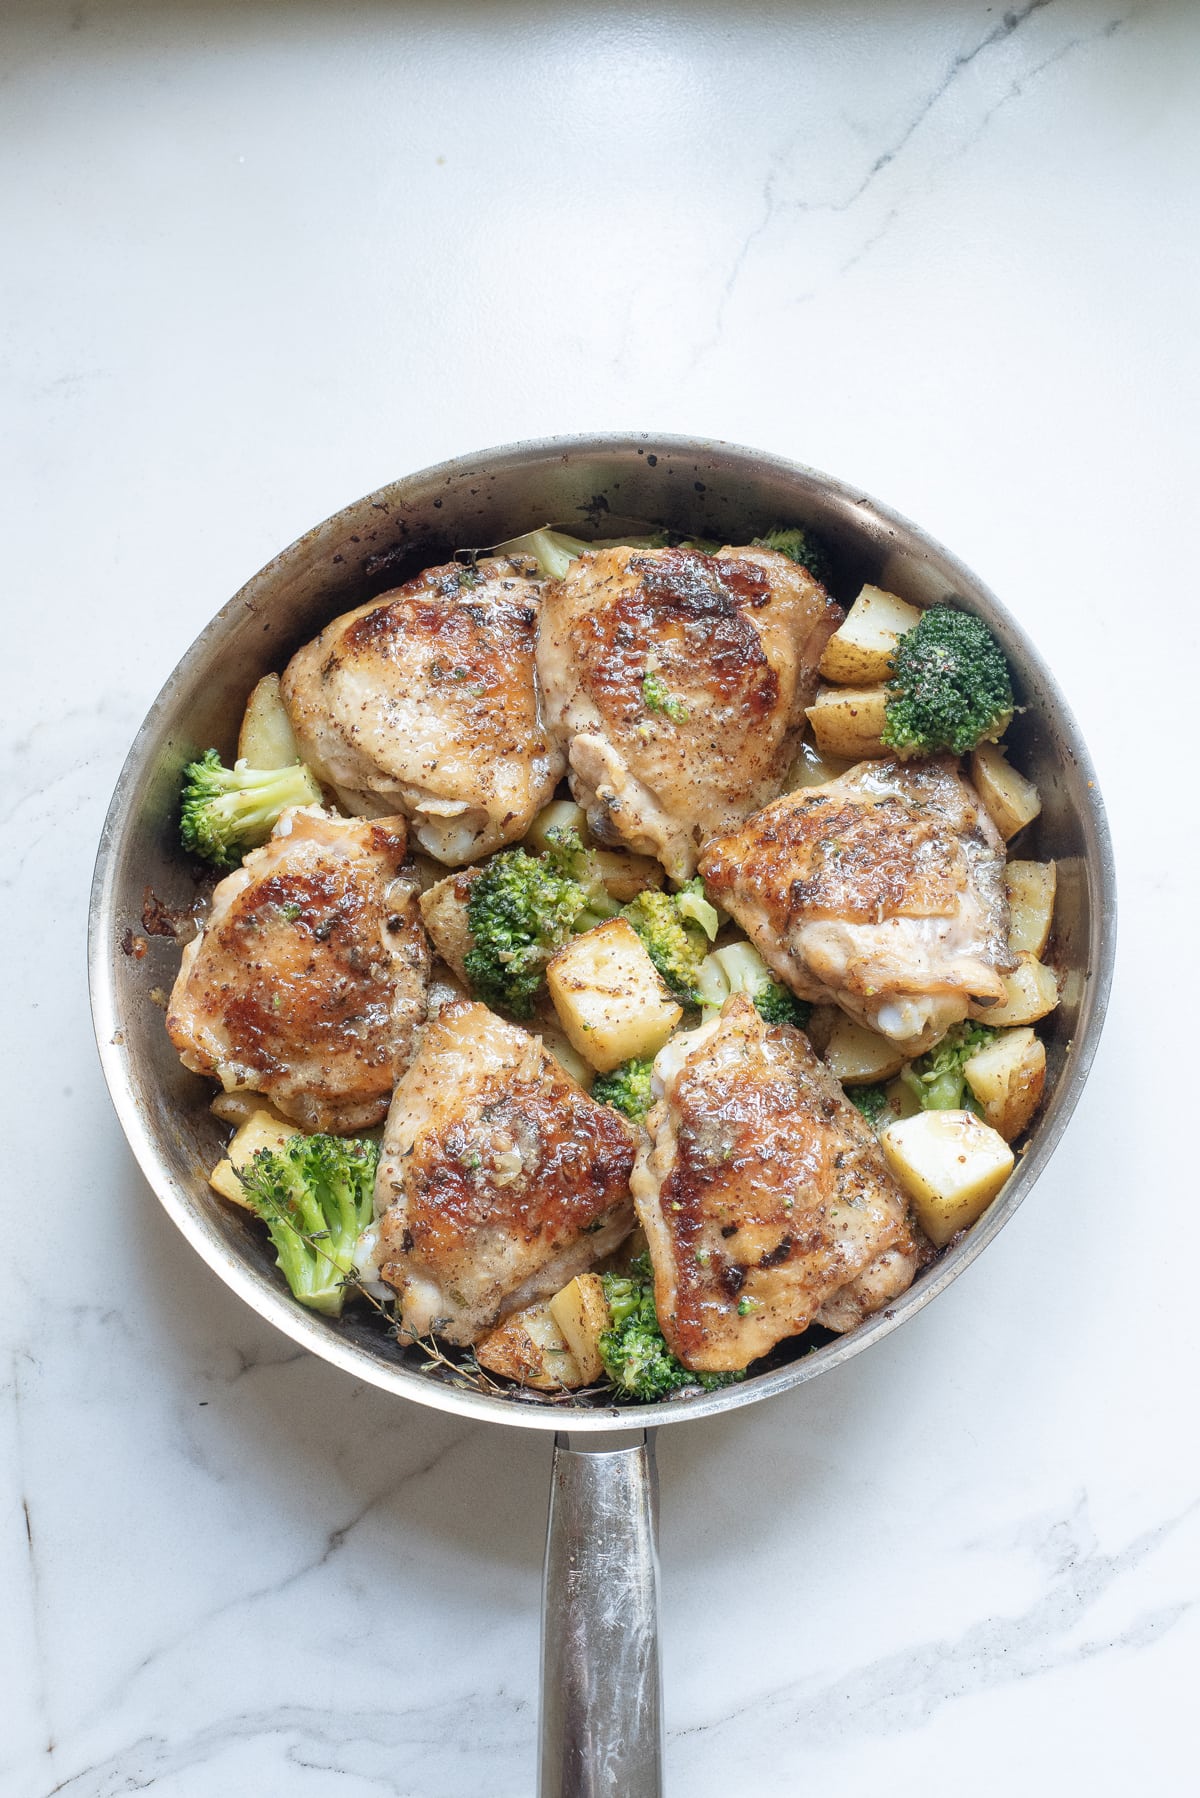 Cooked chicken thighs, potatoes, and broccoli in a metal skillet